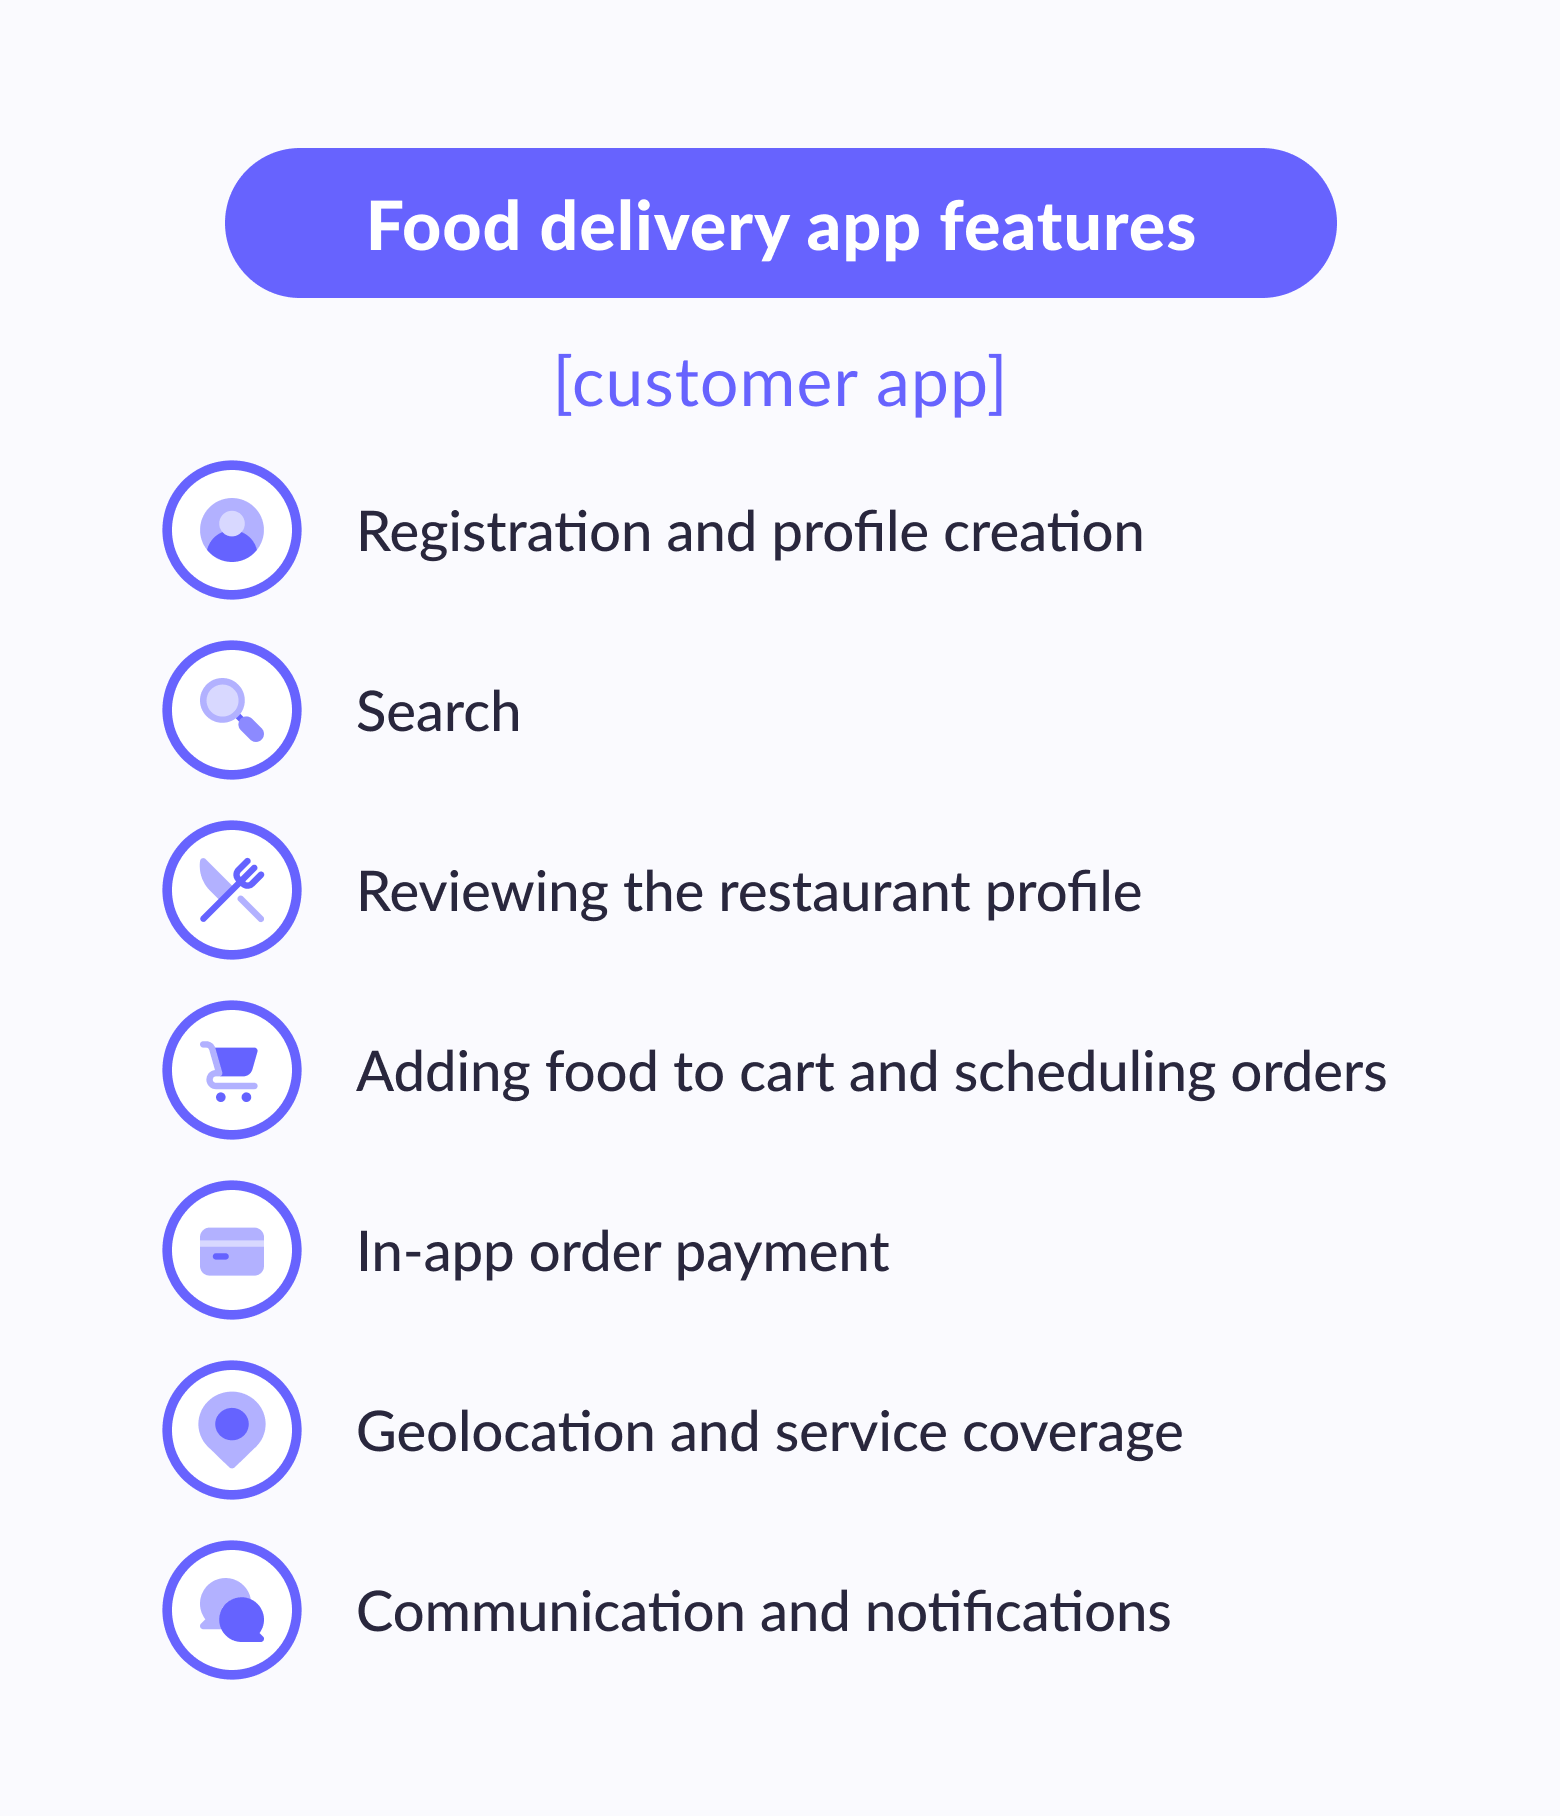 Food delivery app features of the customer app